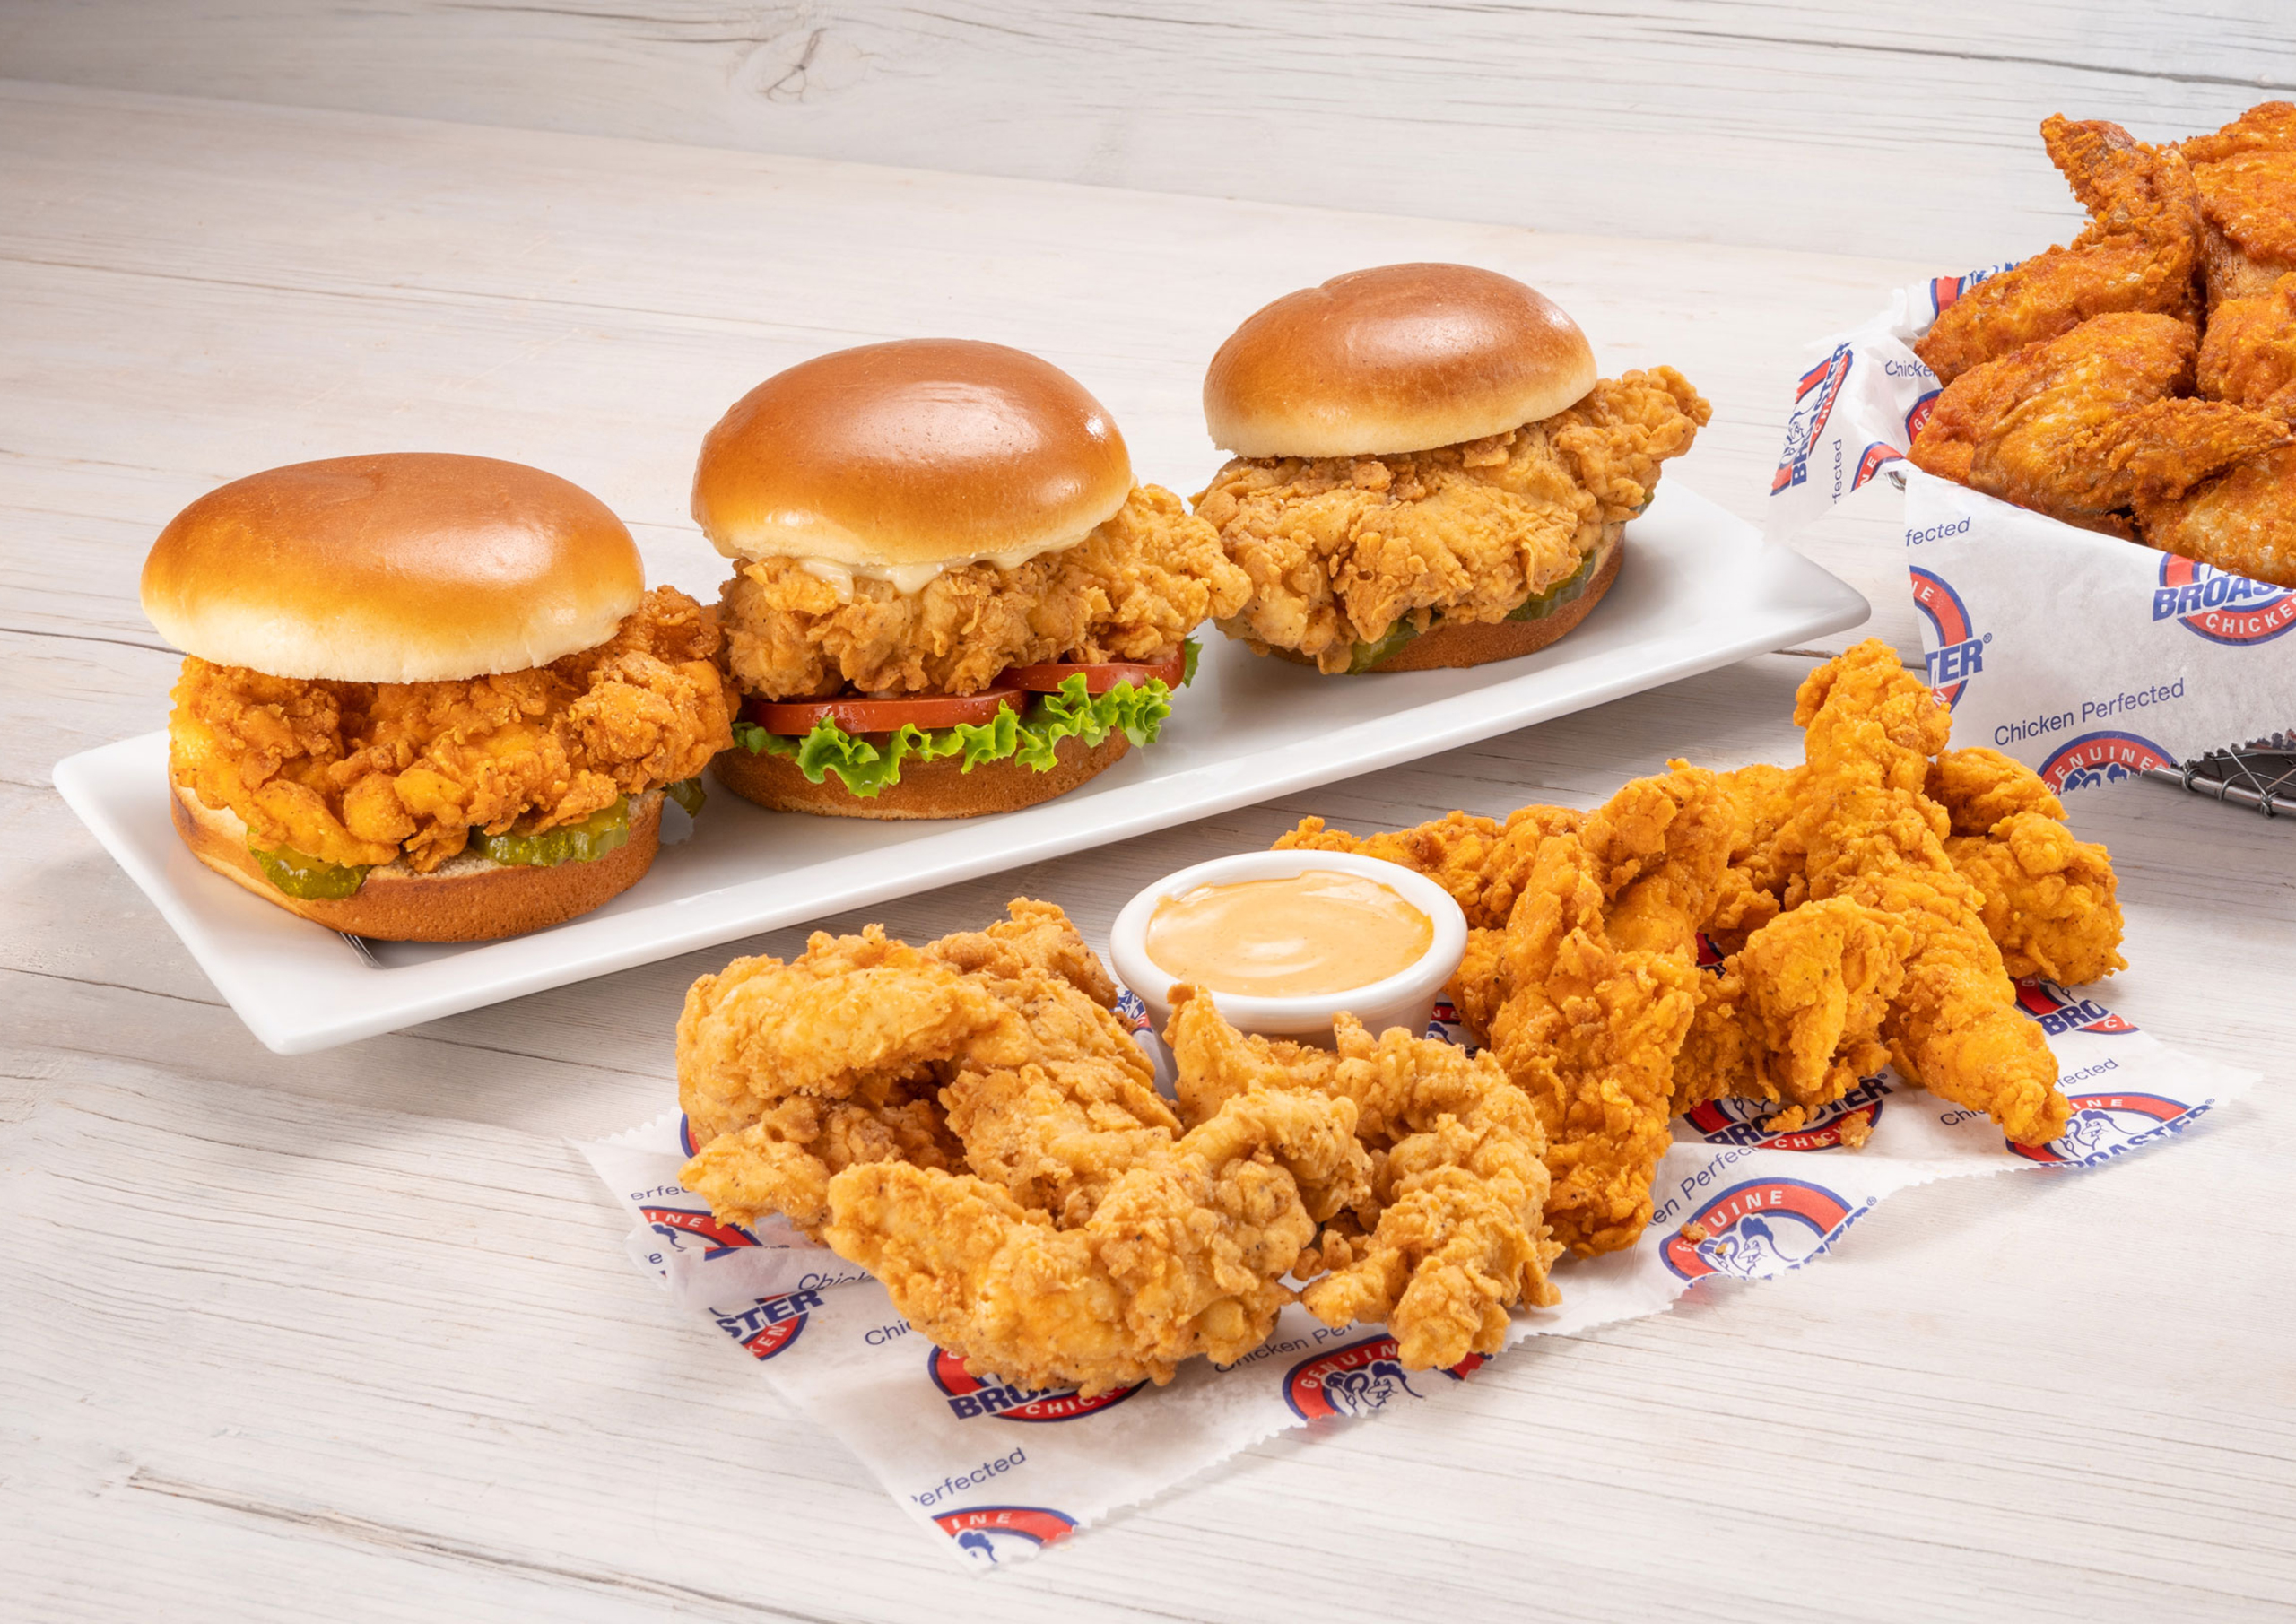 Chicken sandwiches, wings and tenders from Broaster